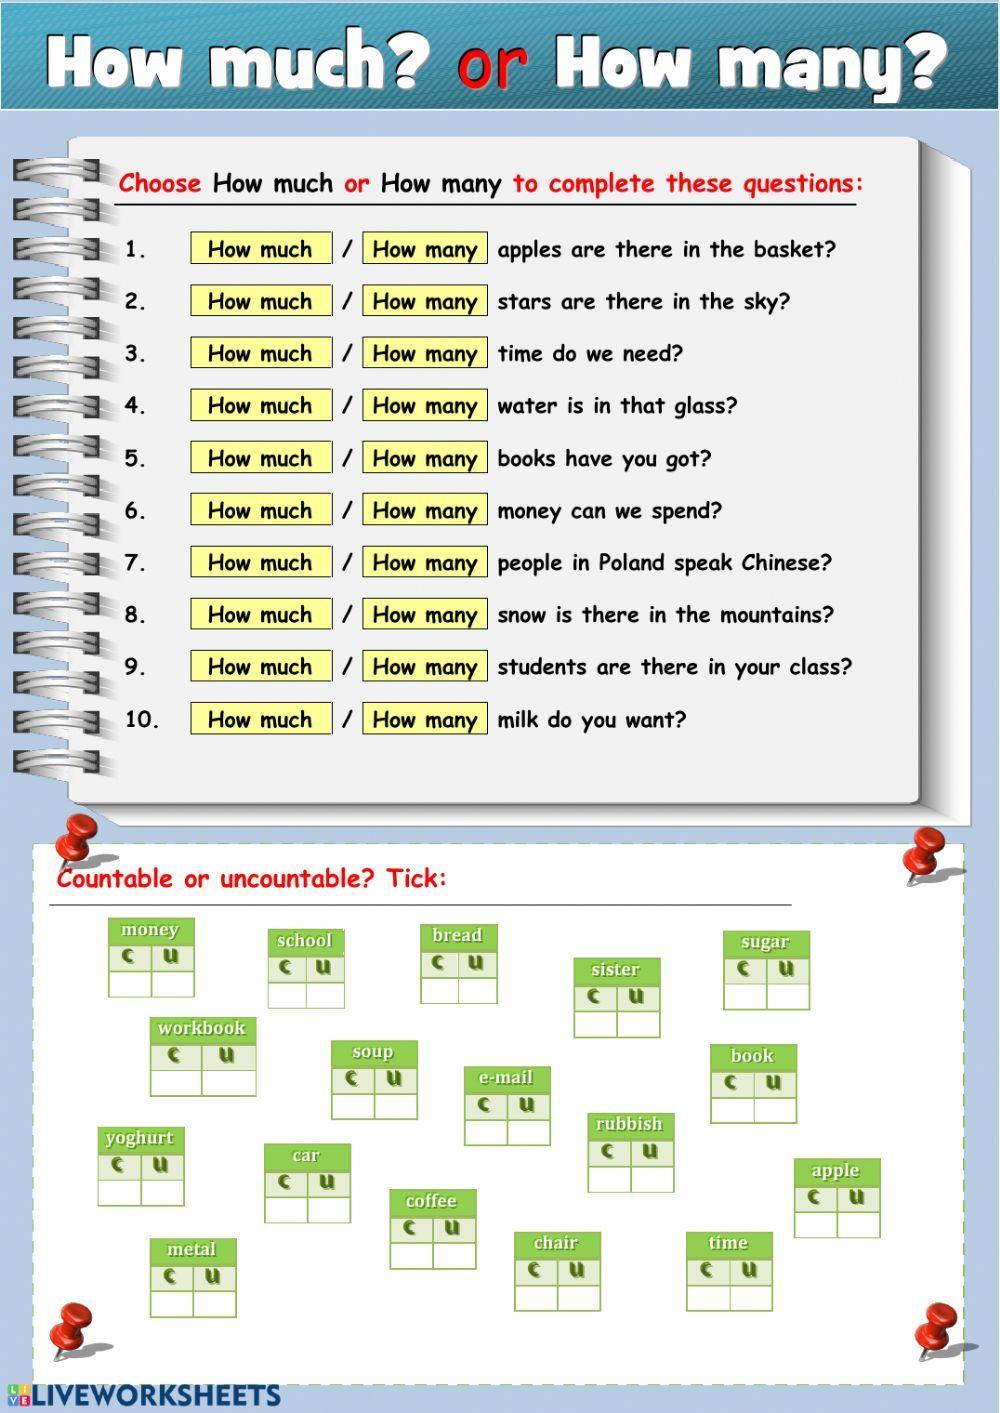 How much? or How many? worksheet | Live Worksheets